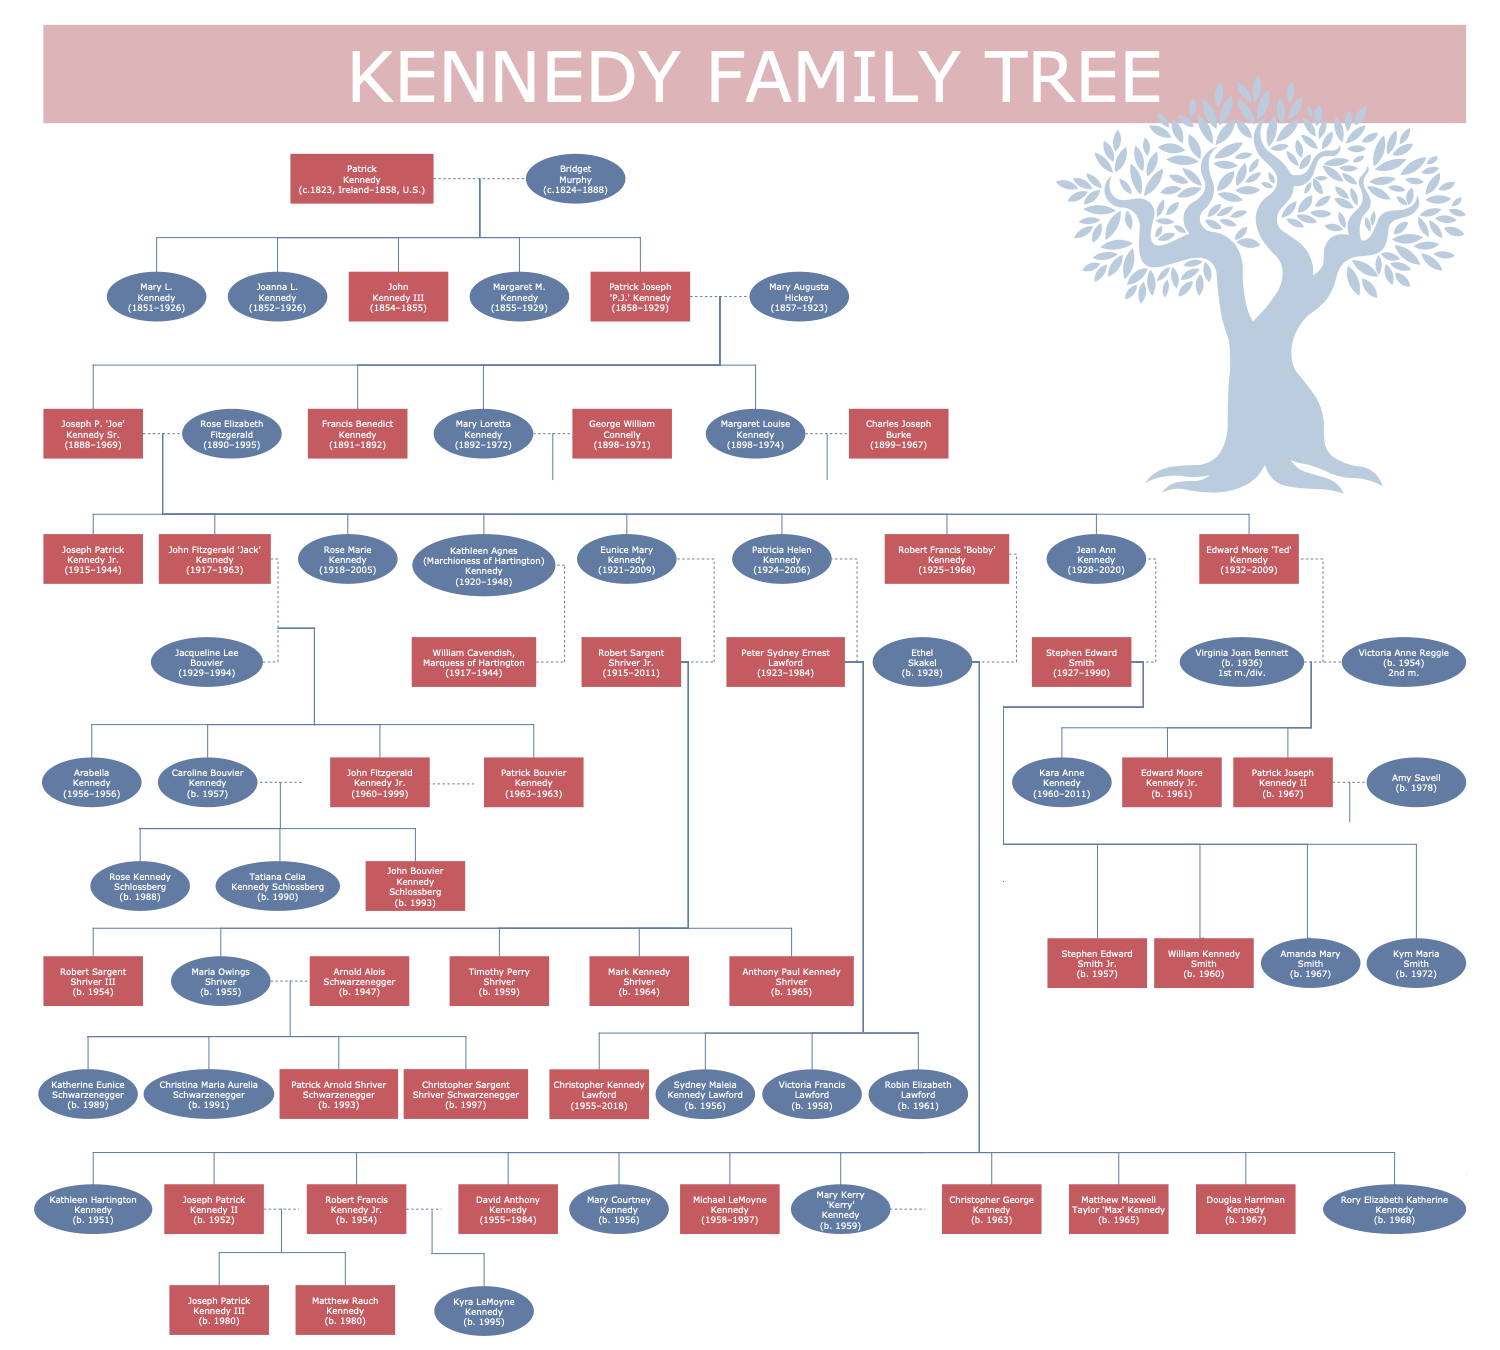 https://www.conceptdraw.com/solution-park/resource/images/solutions/diagram-family-tree/DIAGRAMS-Family-Tree-Kennedy-Family-Tree53.png